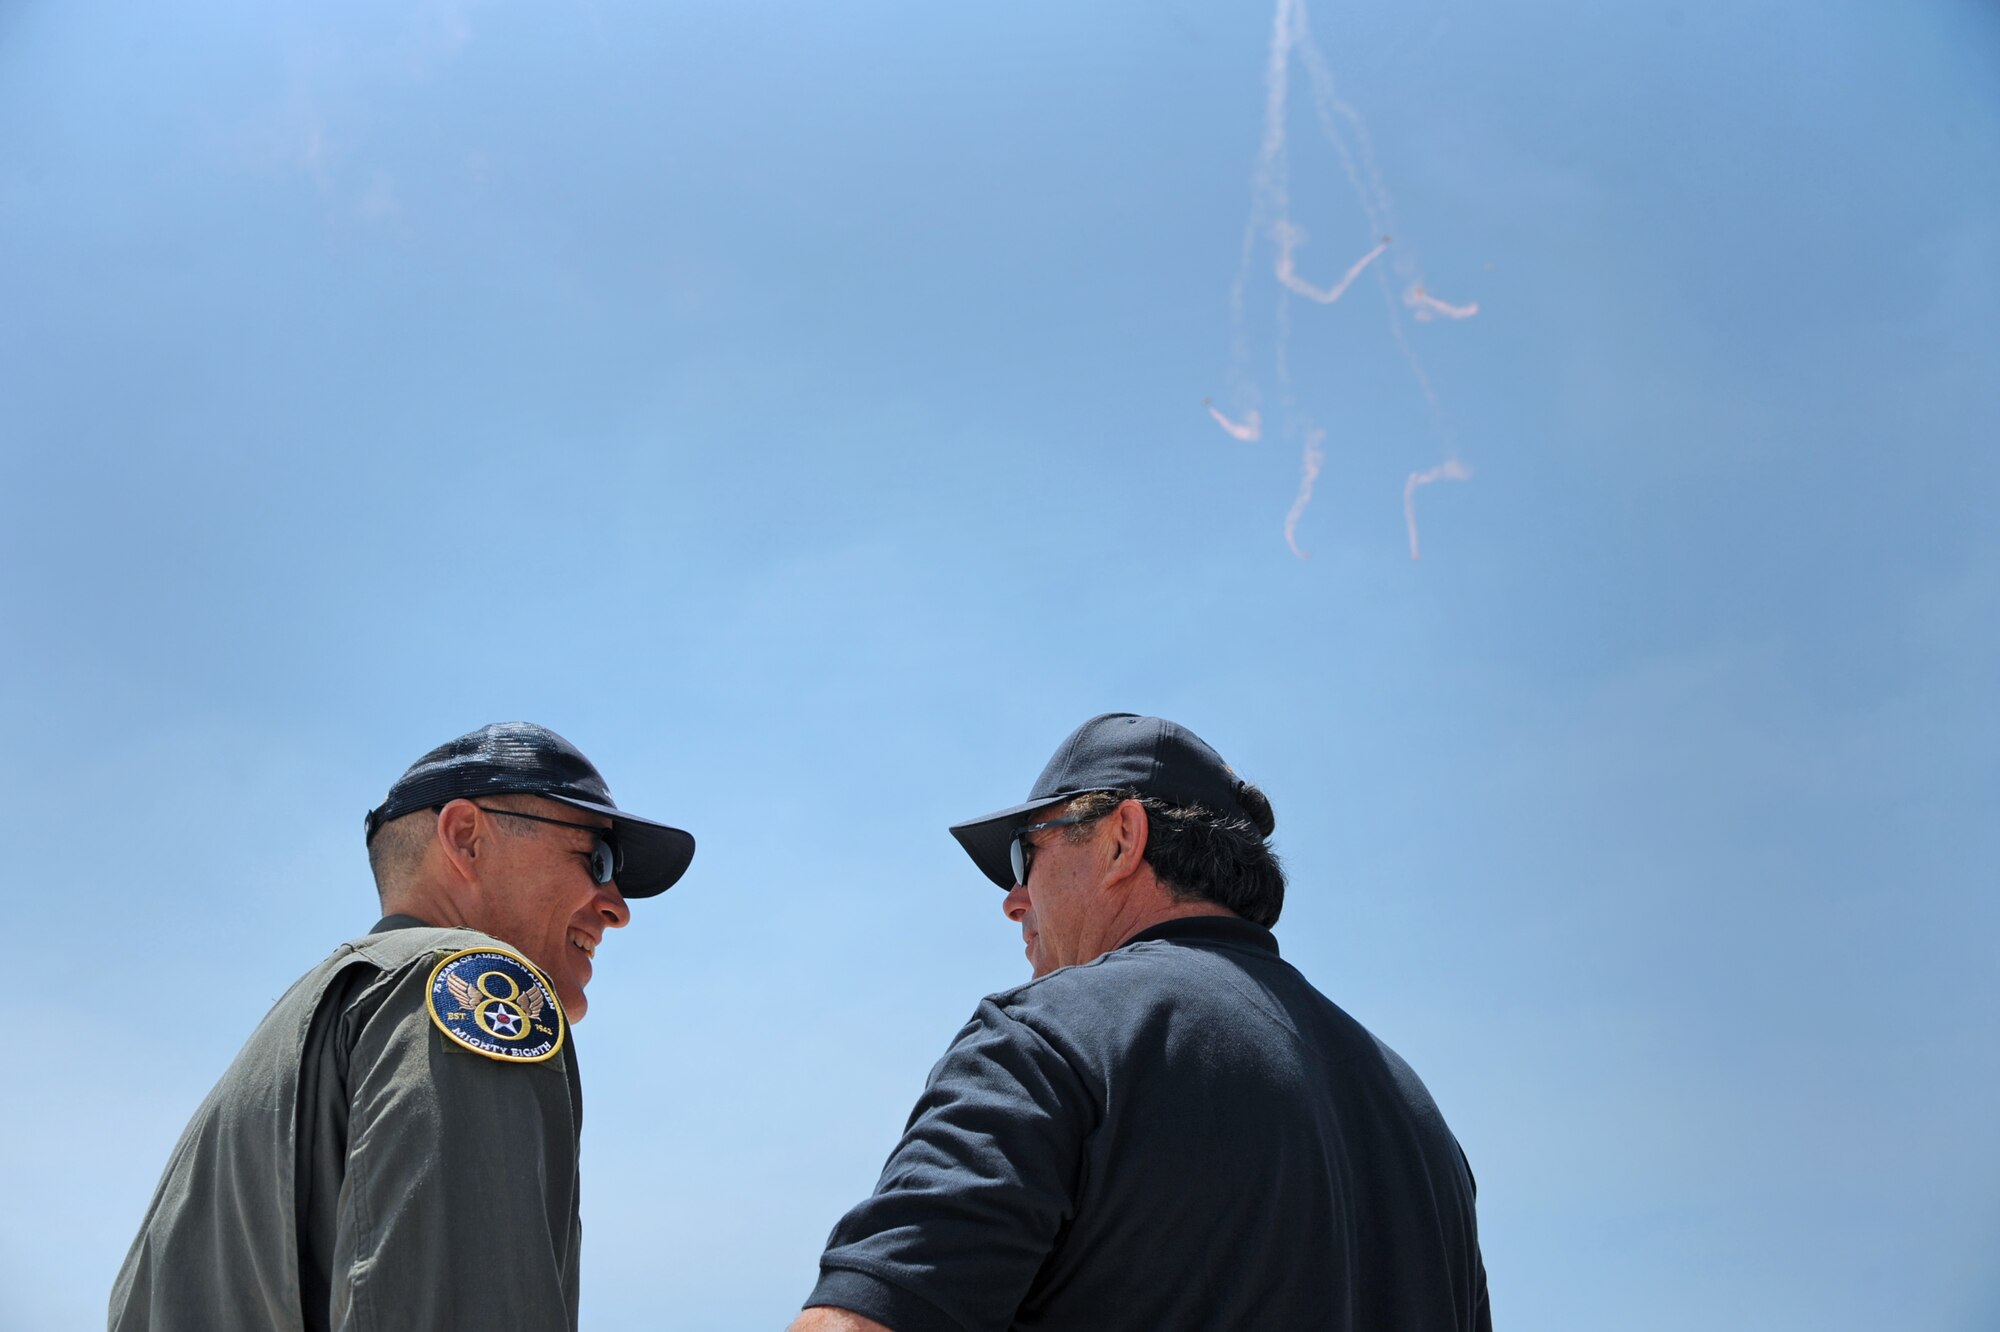 Maj. Gen. Thomas Bussiere, Eighth Air Force commander, left, attends the Salute to America’s Heroes Air and Sea Show in Miami Beach, Fla., May 28, 2017. The weekend-long airshow allowed U.S. service member participants to demonstrate military technology and capabilities, while also educating the public about various aspects of the U.S. military. (U.S. Air Force photo by Senior Airman Erin Trower)